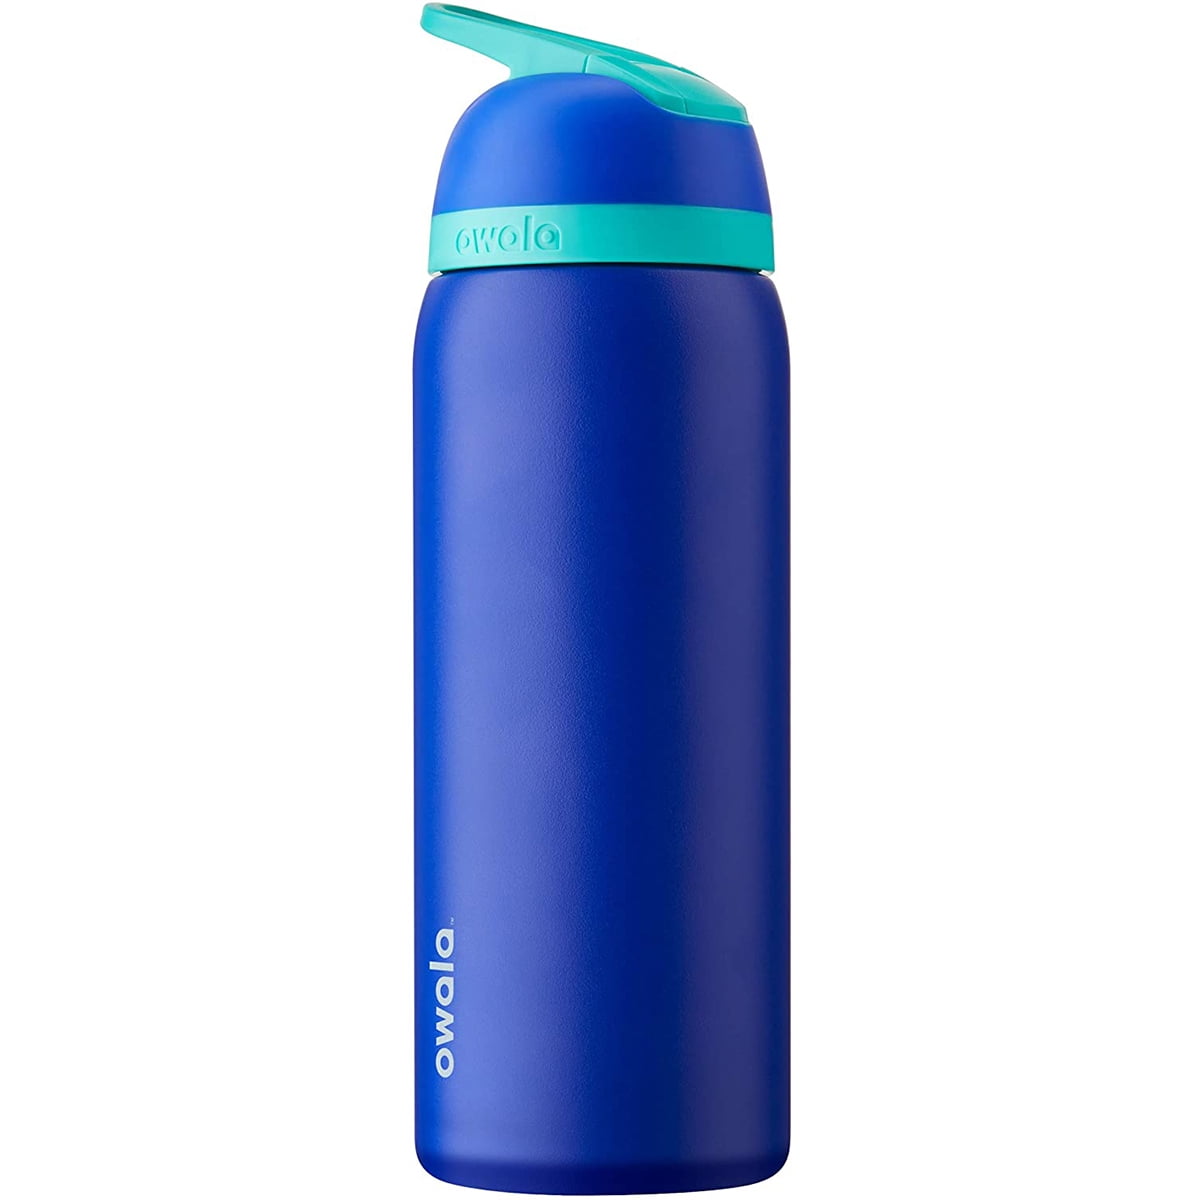 Owala Flip 32 oz. Vacuum Insulated Stainless Steel Water Bottle - Blue 